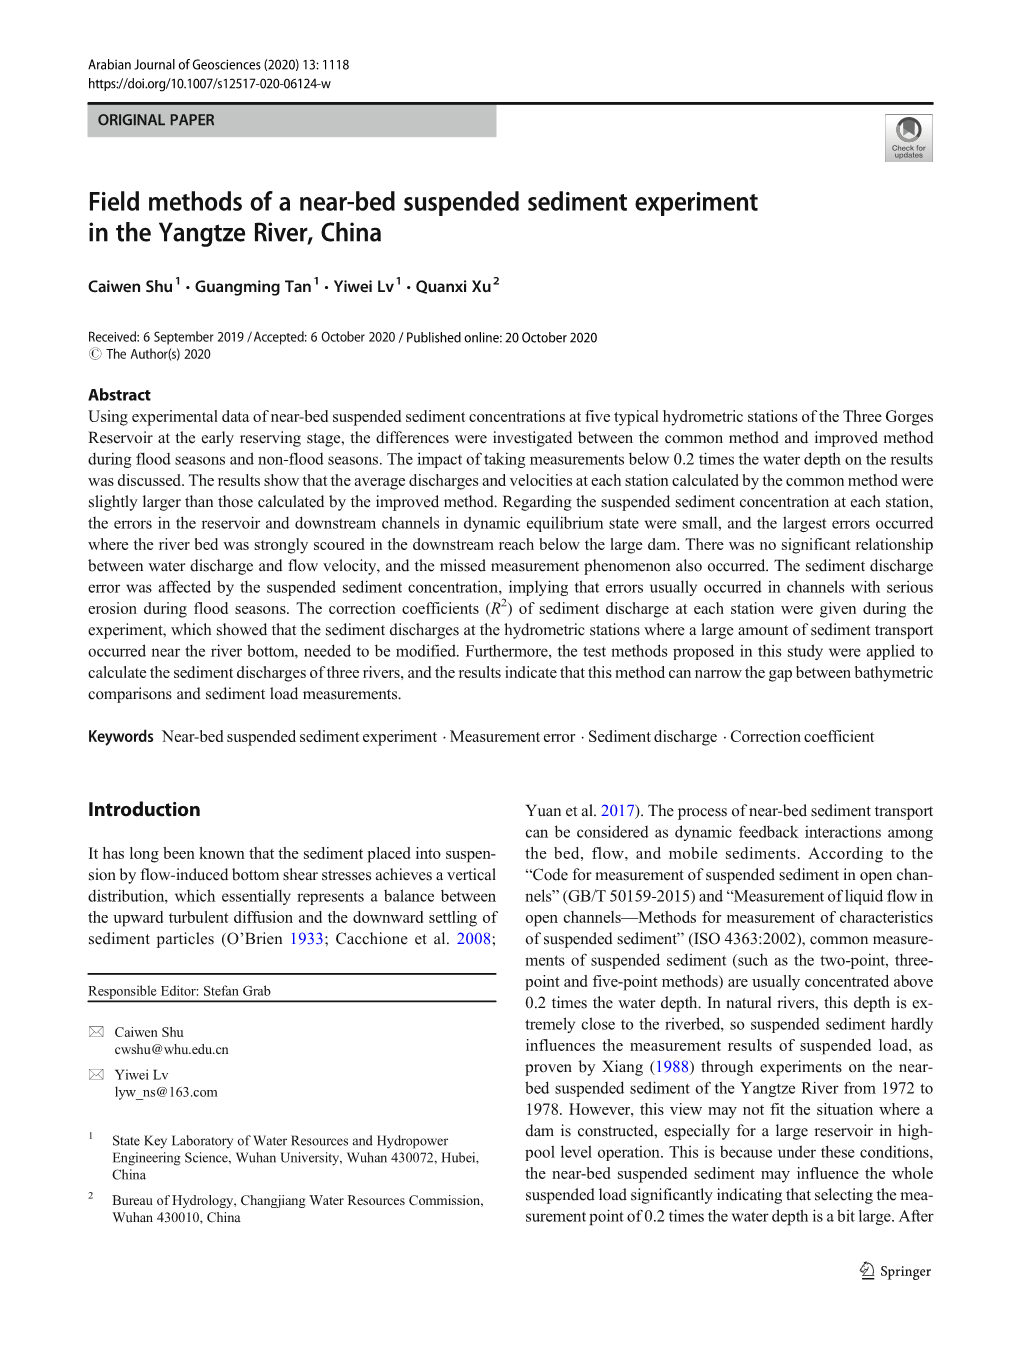 Field Methods of a Near-Bed Suspended Sediment Experiment in the Yangtze River, China